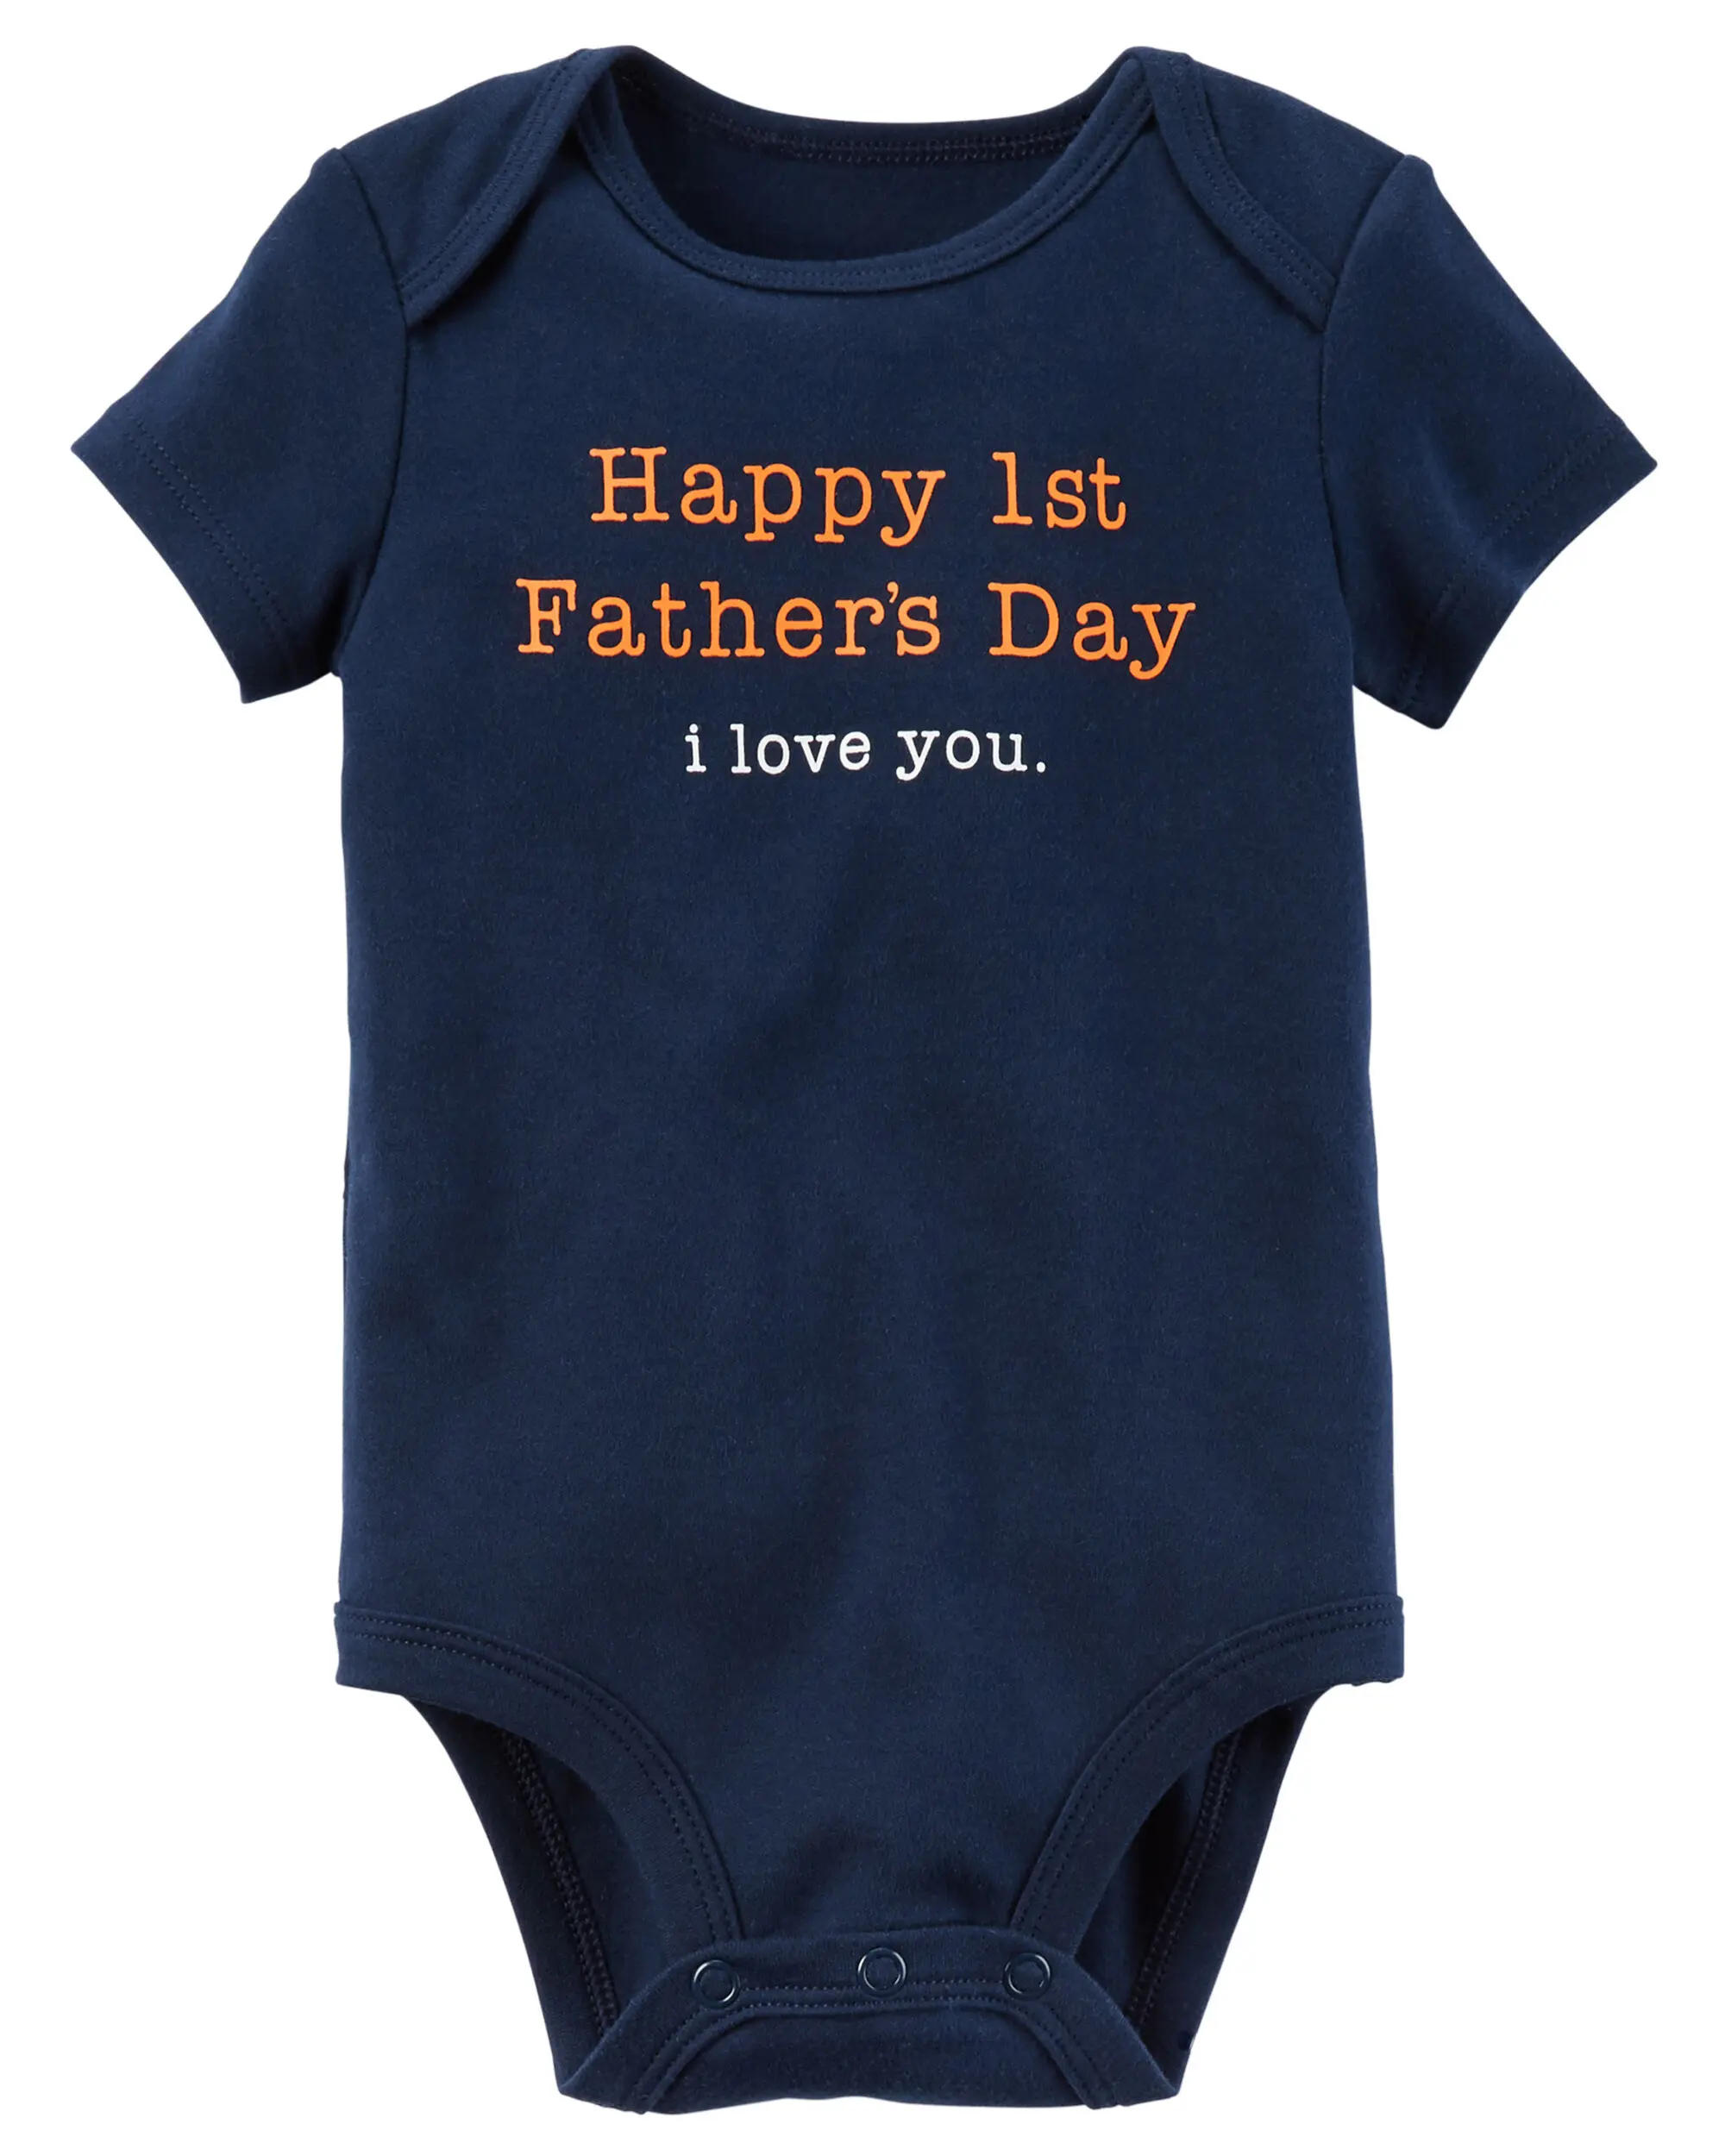 High Quality Export Oriented Baby Romper From Bangladesh custom baby t shirts